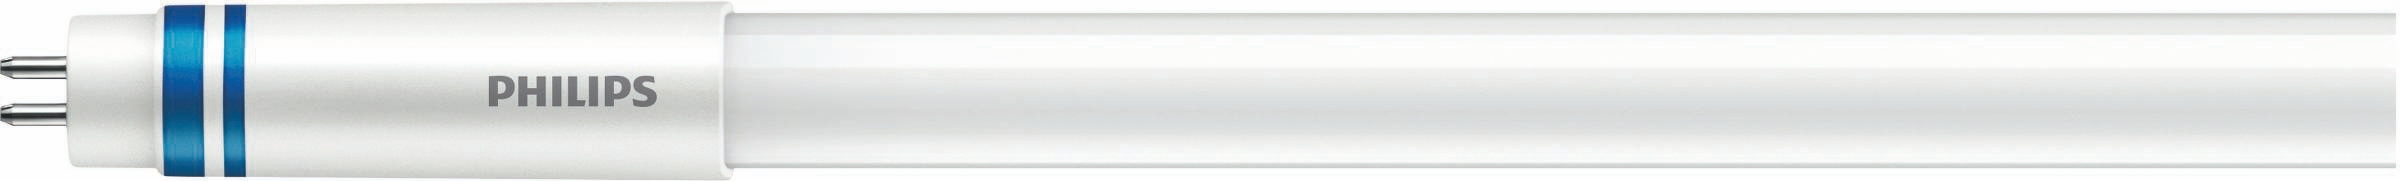 Philips 74951400 MASTER LEDtube T5 InstantFit EVG 1200 mm, 200 °, 26 W, 830, 3700 lm, G5, dimmbar